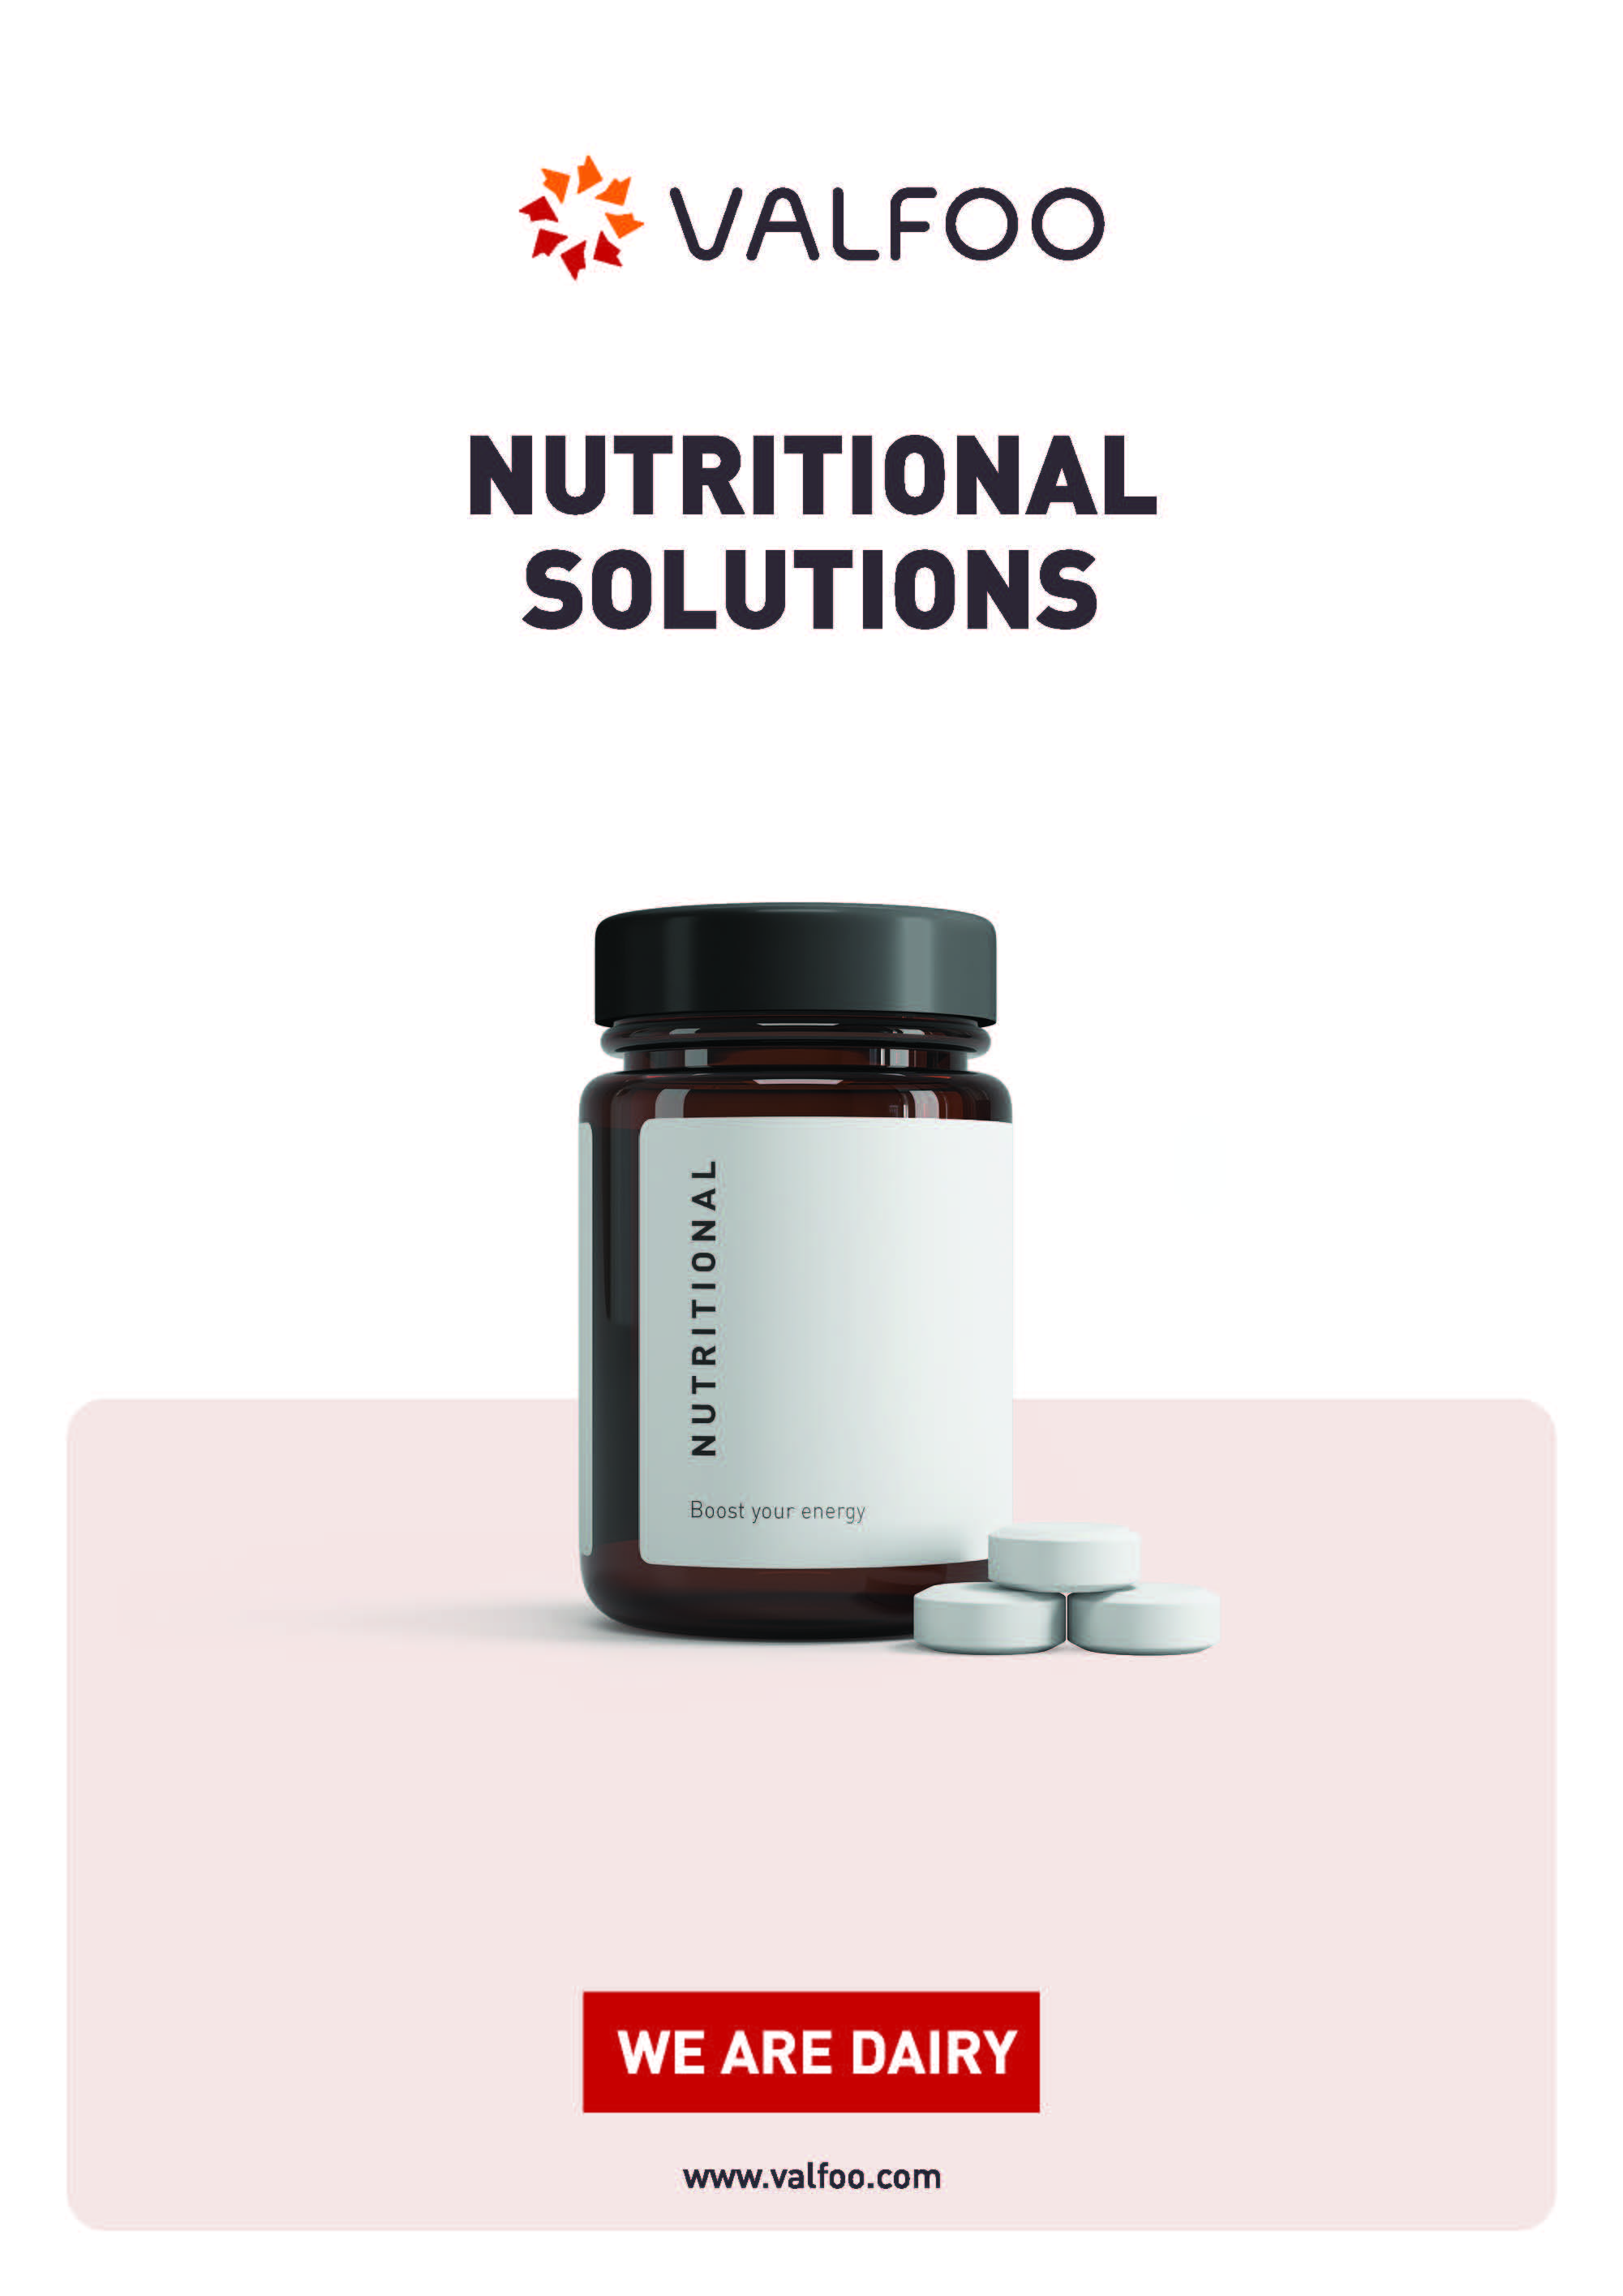 Valfoo Nutritional Solutions